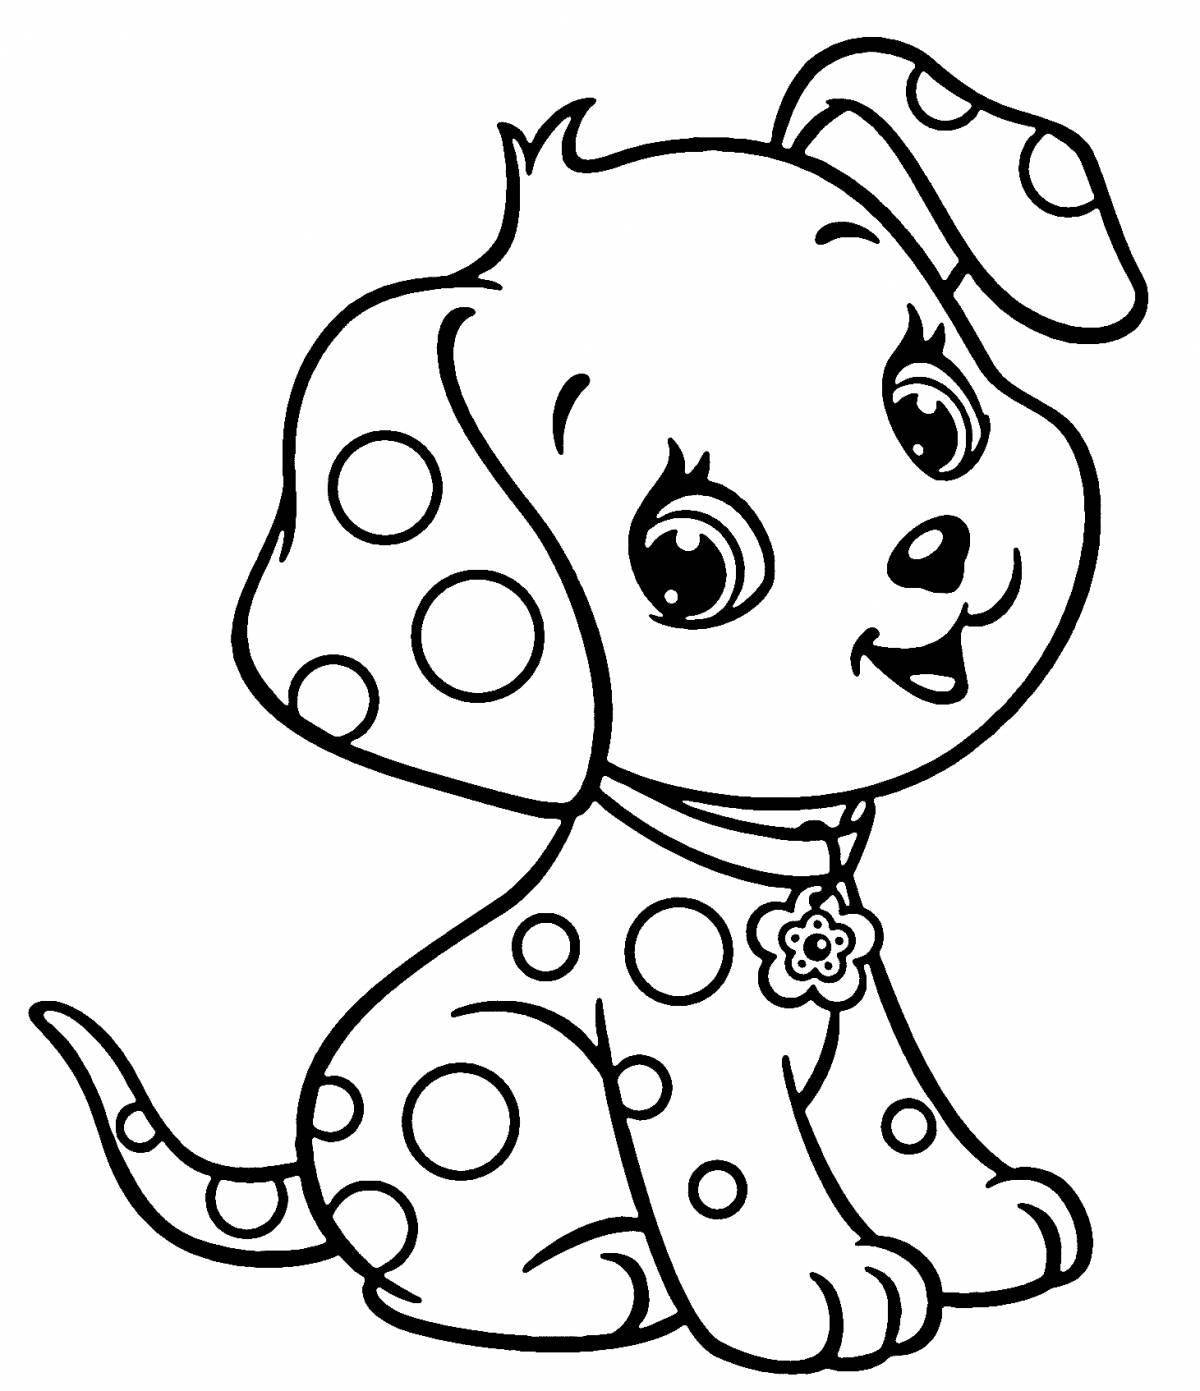 Fun coloring puppy for kids